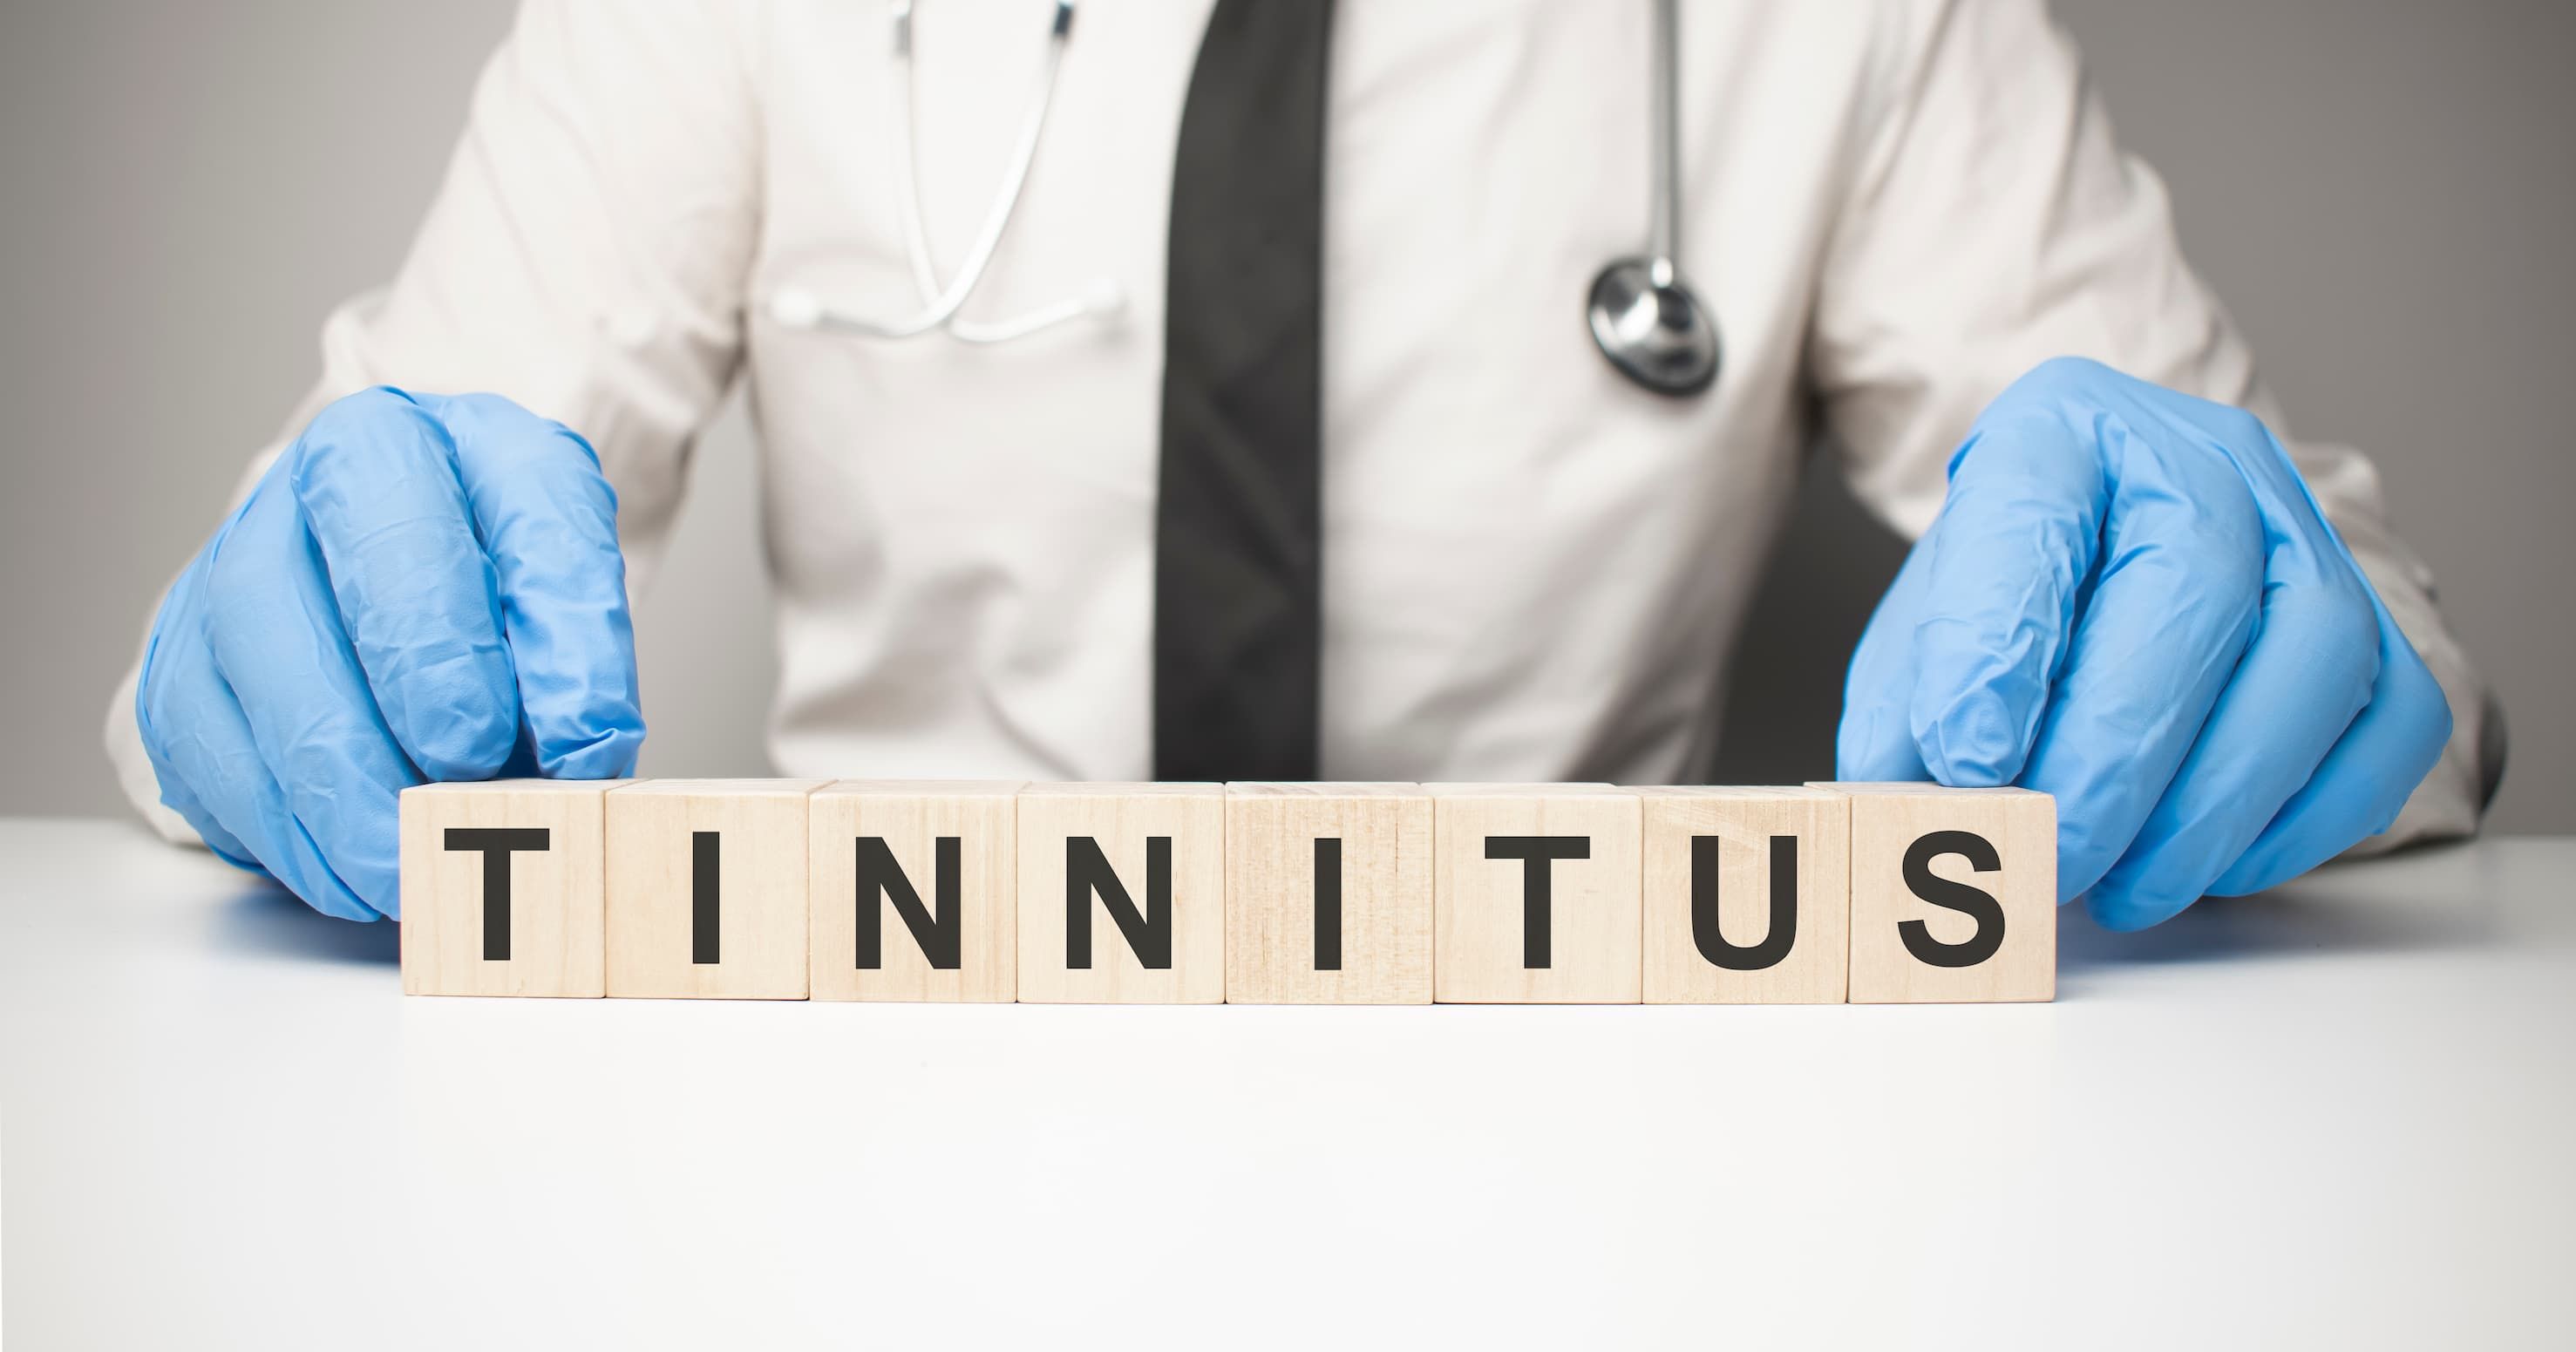 What Is Tinnitus and What Can You Do About It?